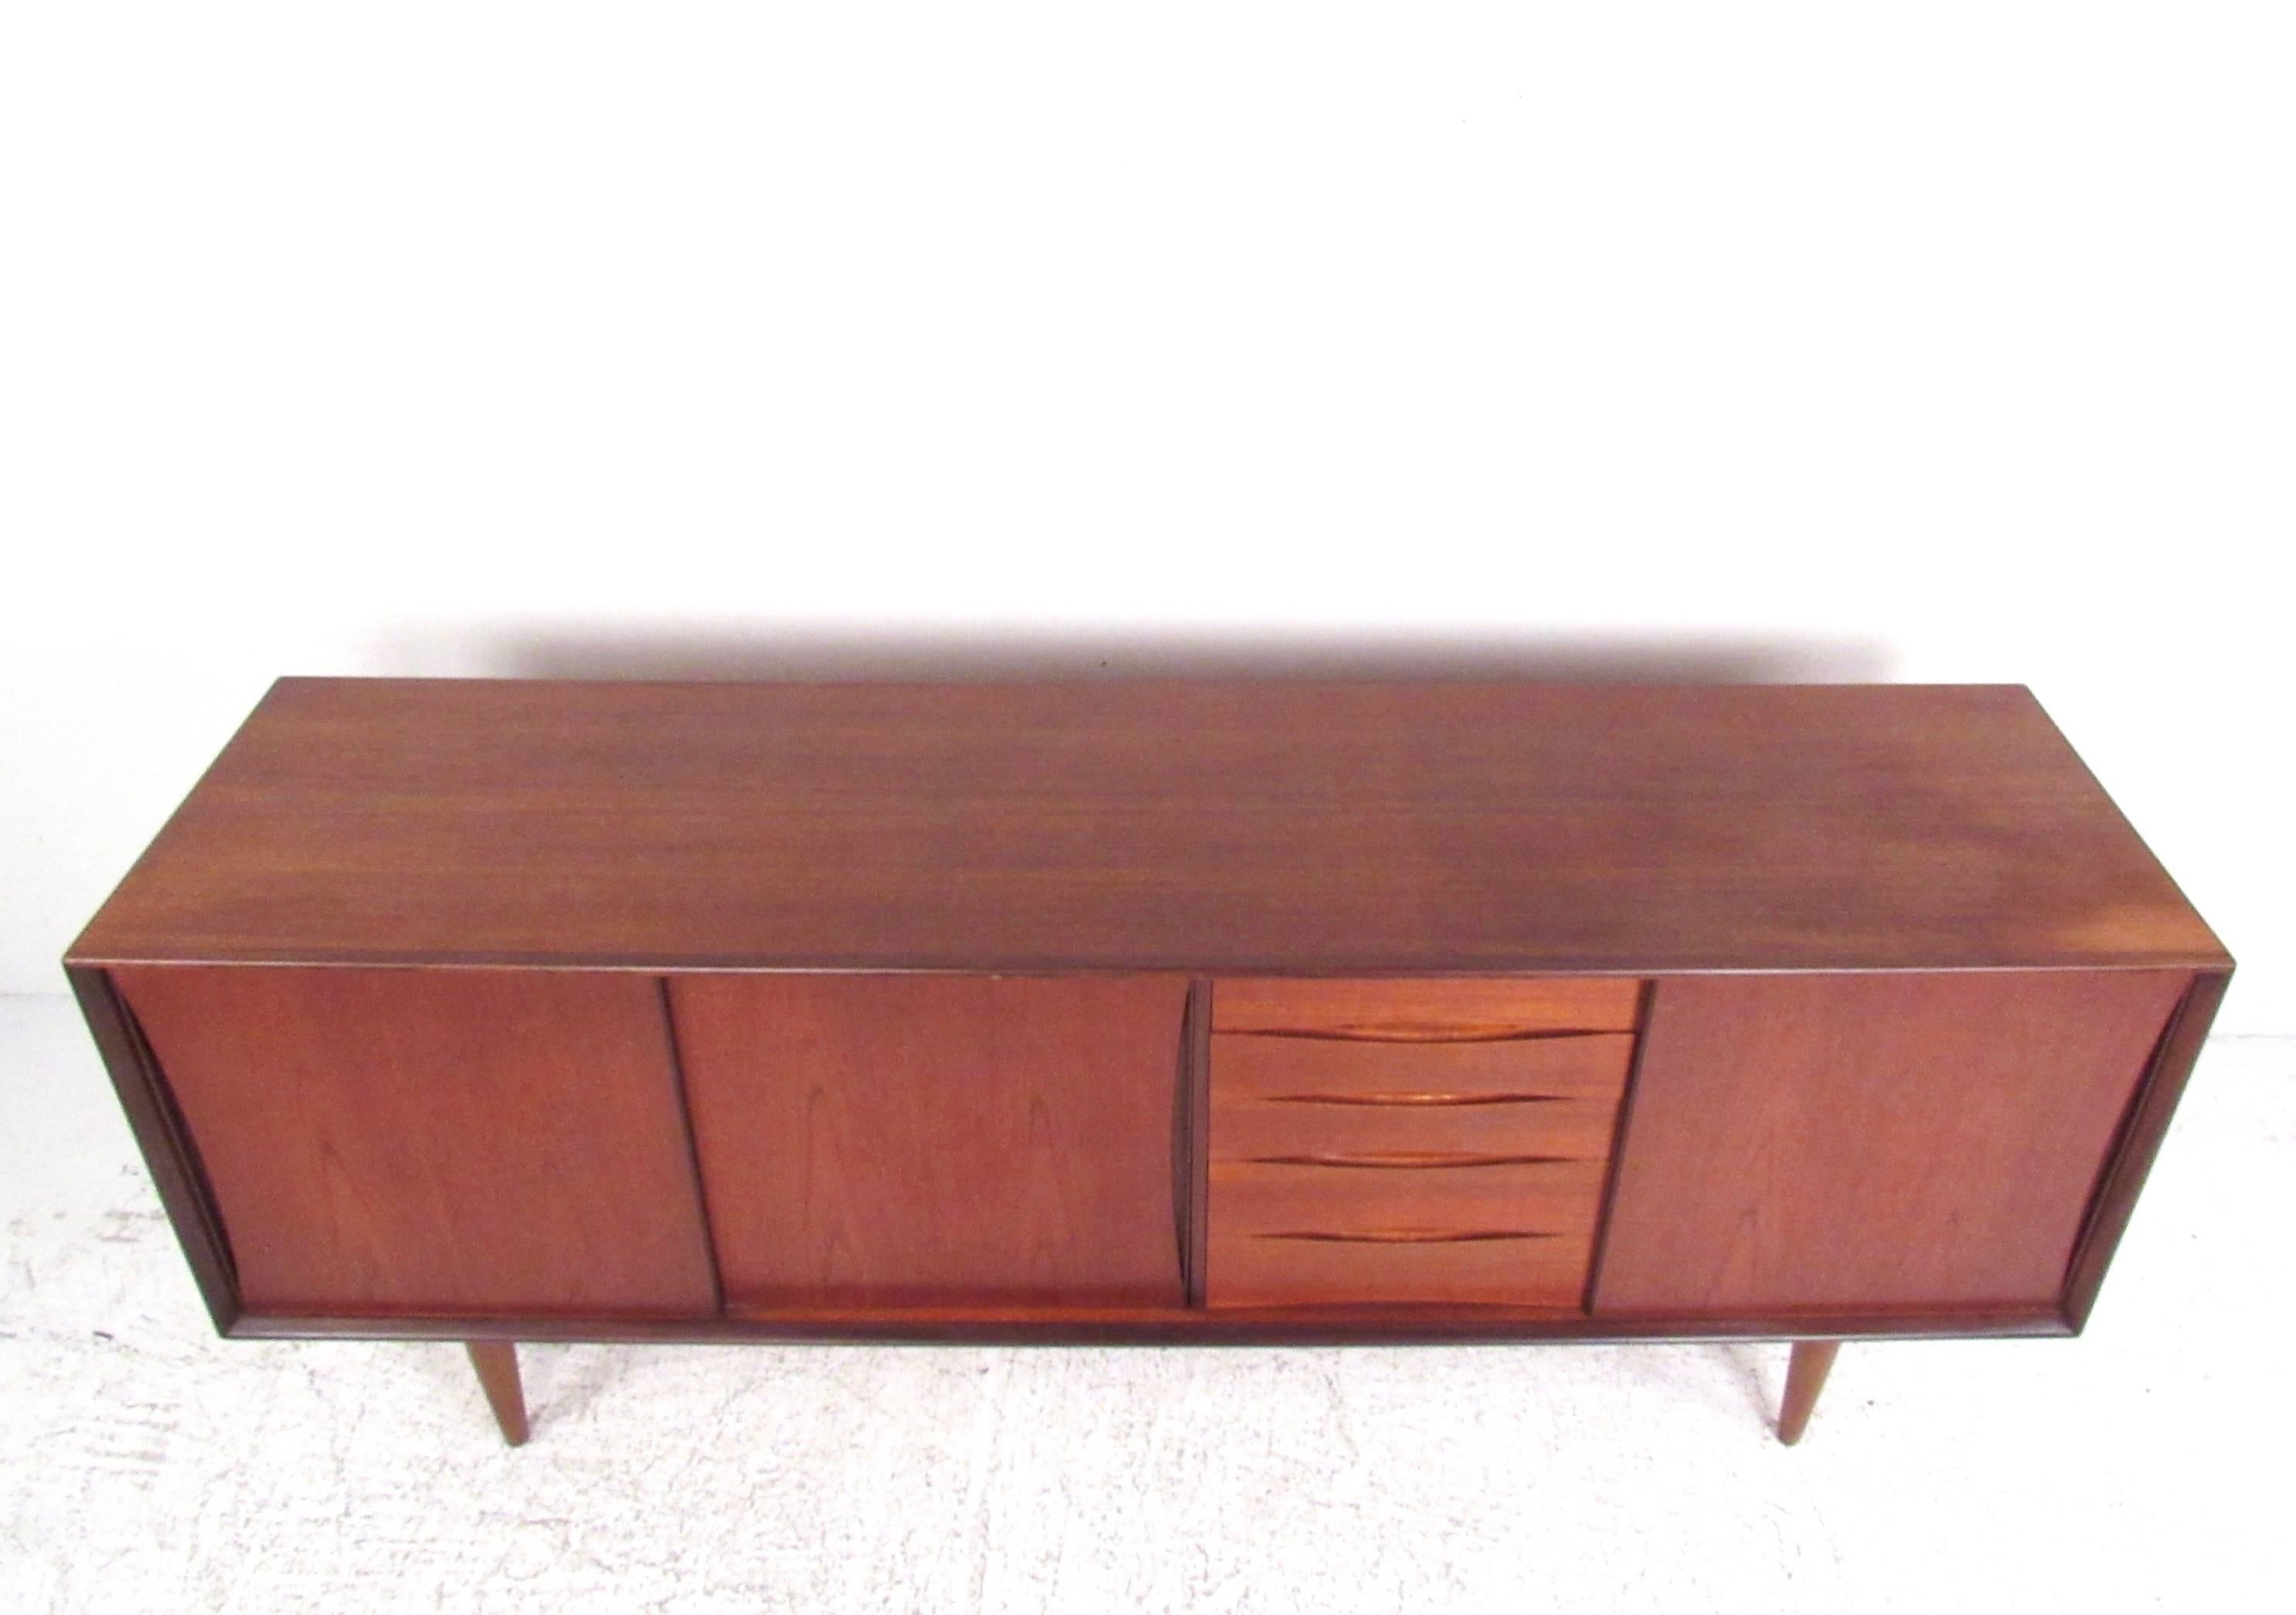 This stylish Scandinavian Modern sideboard features rich Danish teak finish and sturdy midcentury construction. Sculpted drawer pulls and sliding doors add to the Arne Vodder style of this vintage storage piece and make it a striking addition to